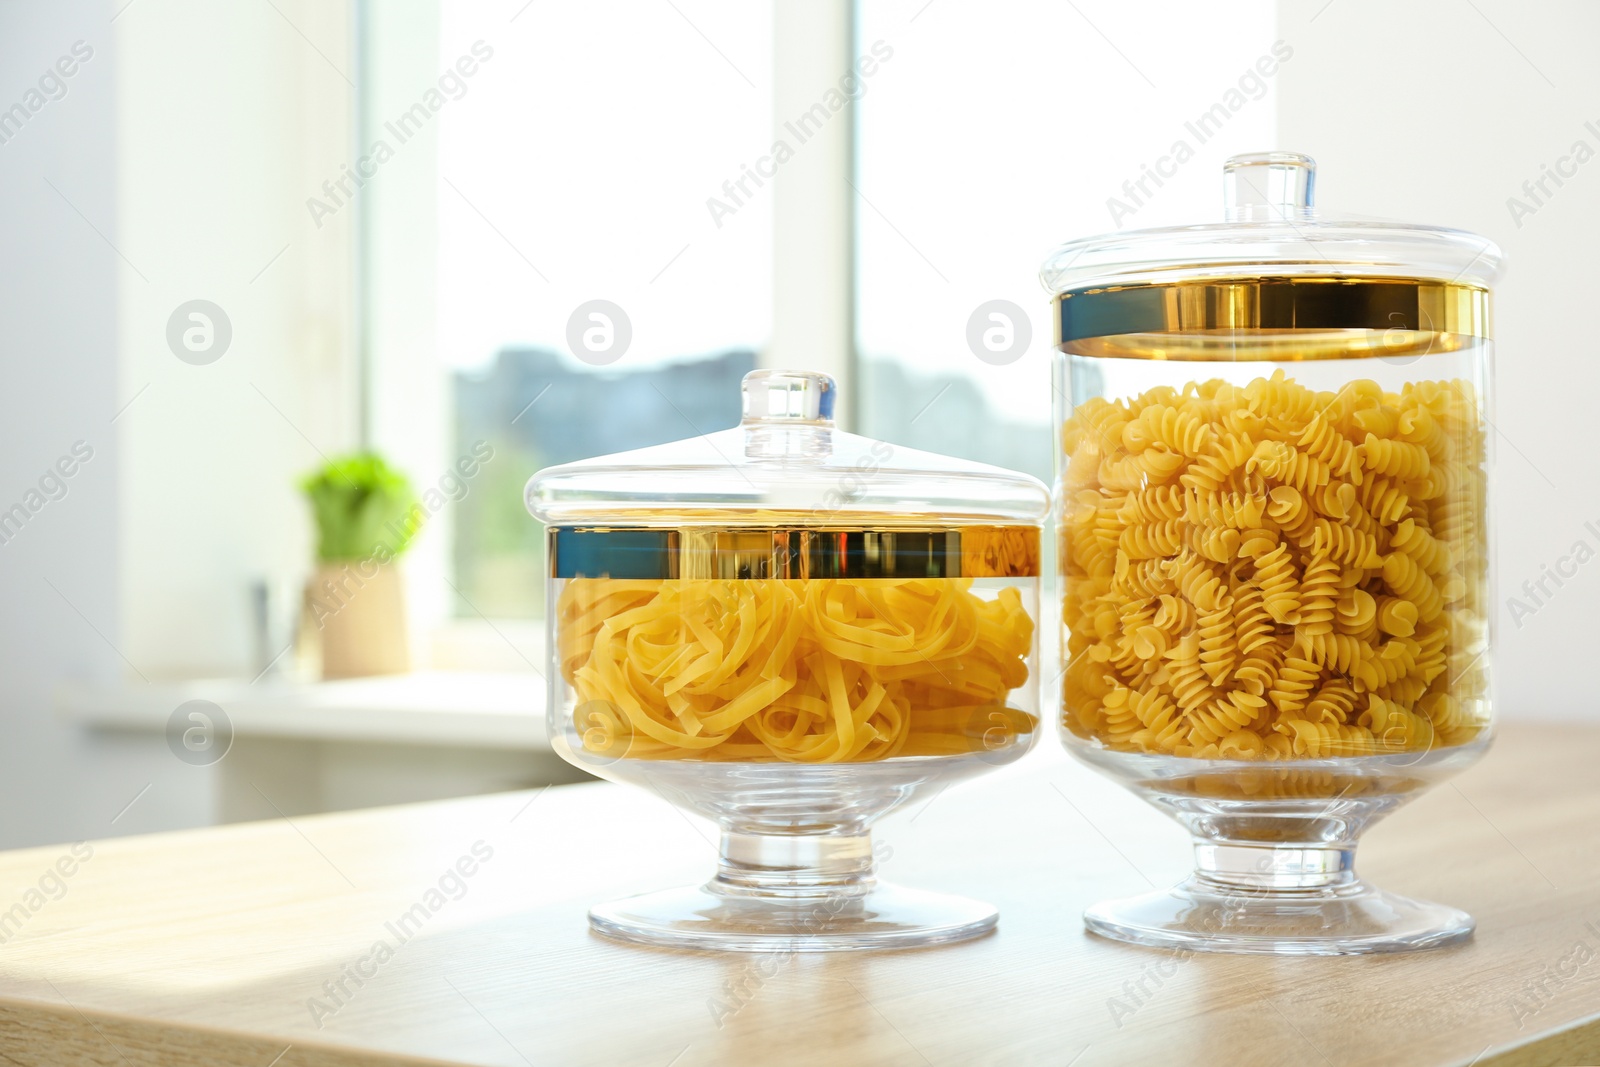 Photo of Products in modern kitchen glass containers on wooden table